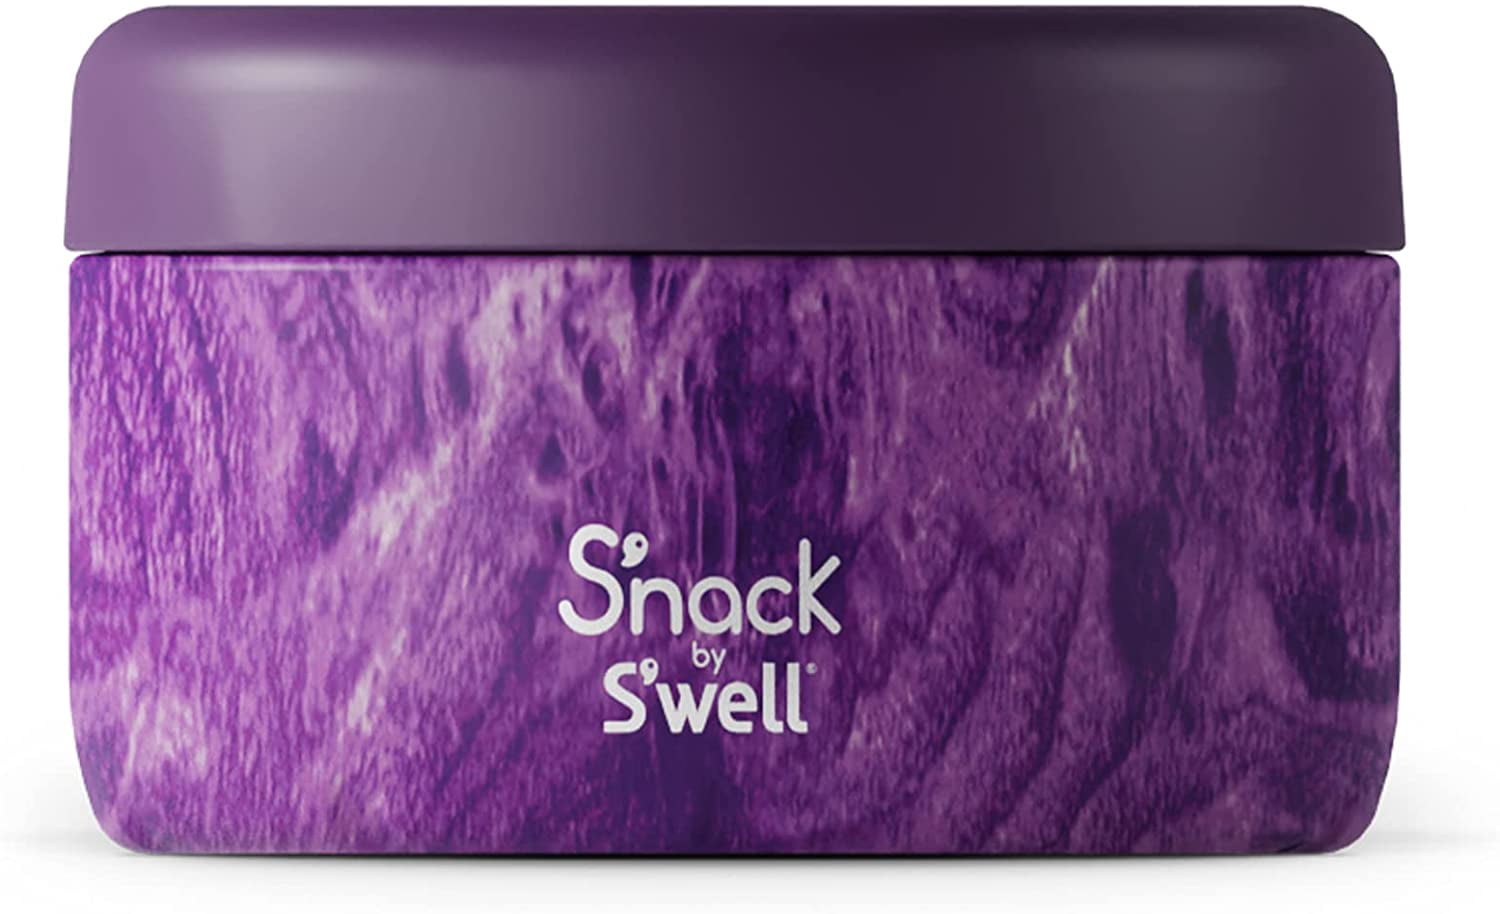 S'well S'nack Stainless Steel Food Container - 10 Oz - Peppermint Tree -  Double-Layered Insulated Bowls Keep Food Cold for 10 Hours and Hot for 4 